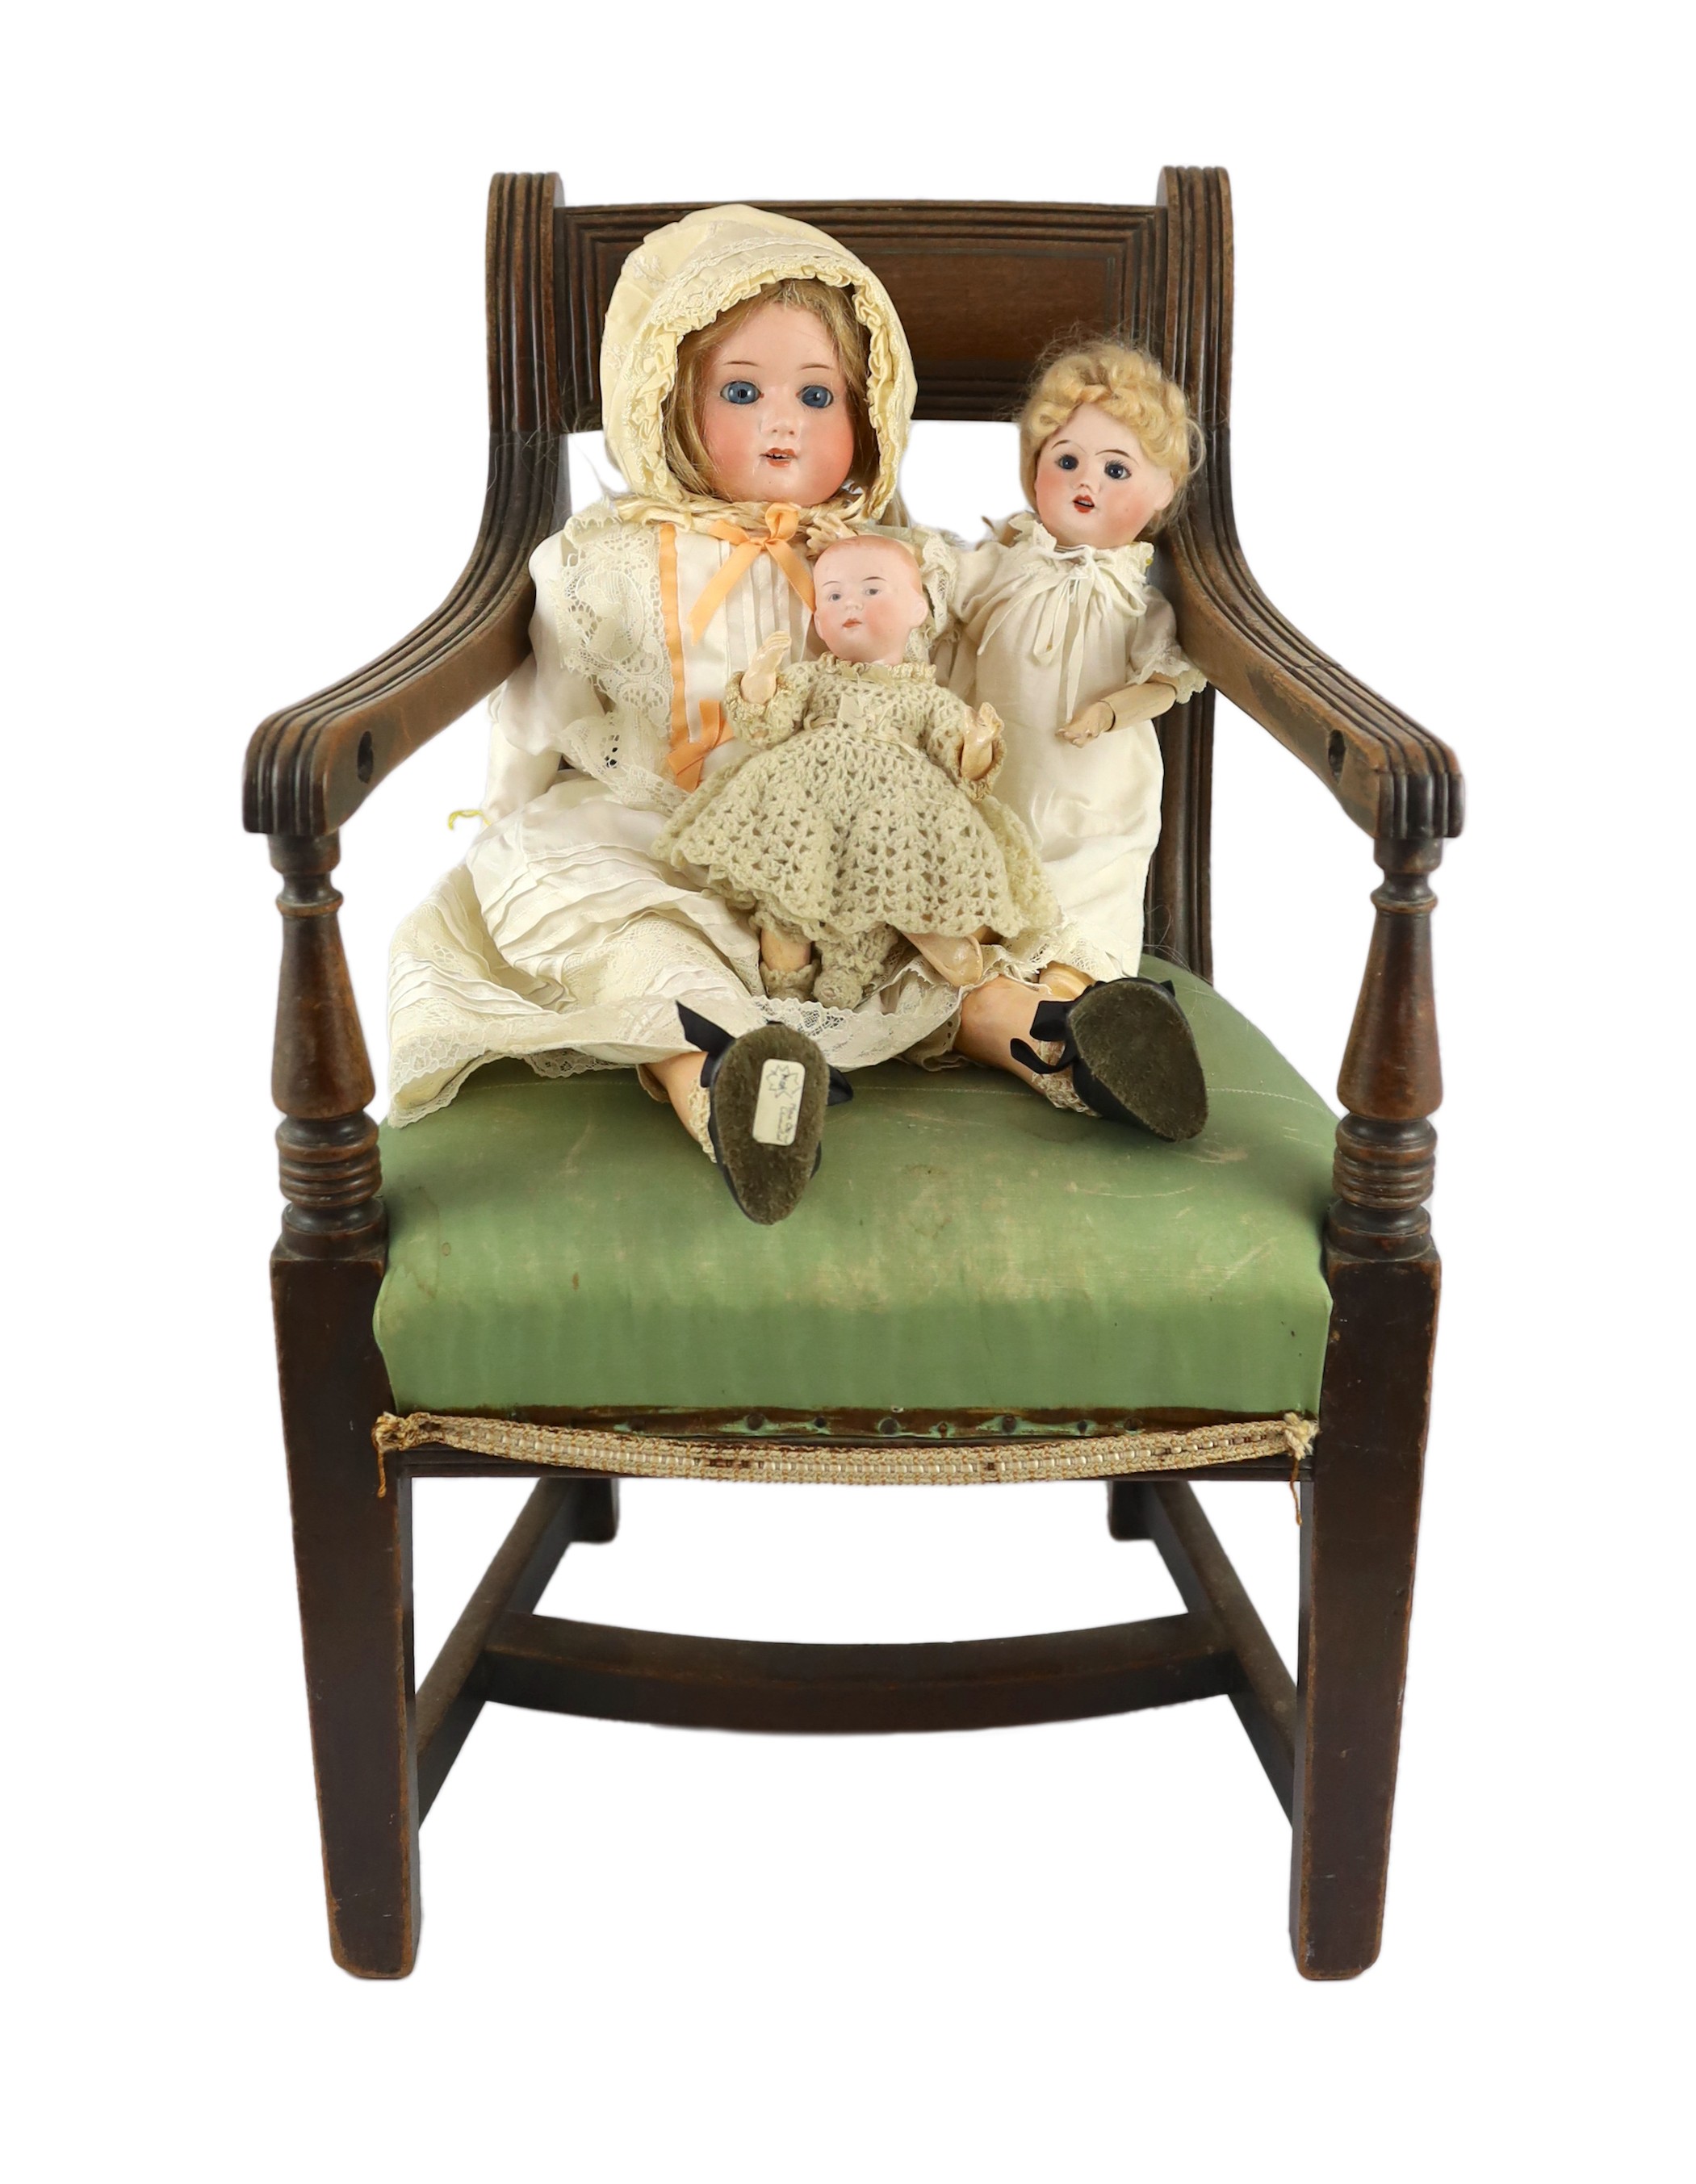 A Max Oscar Arnold bisque doll, German, circa 1920, 11.5in. (3) Please note the chair is for display purposes only.                                                                                                         